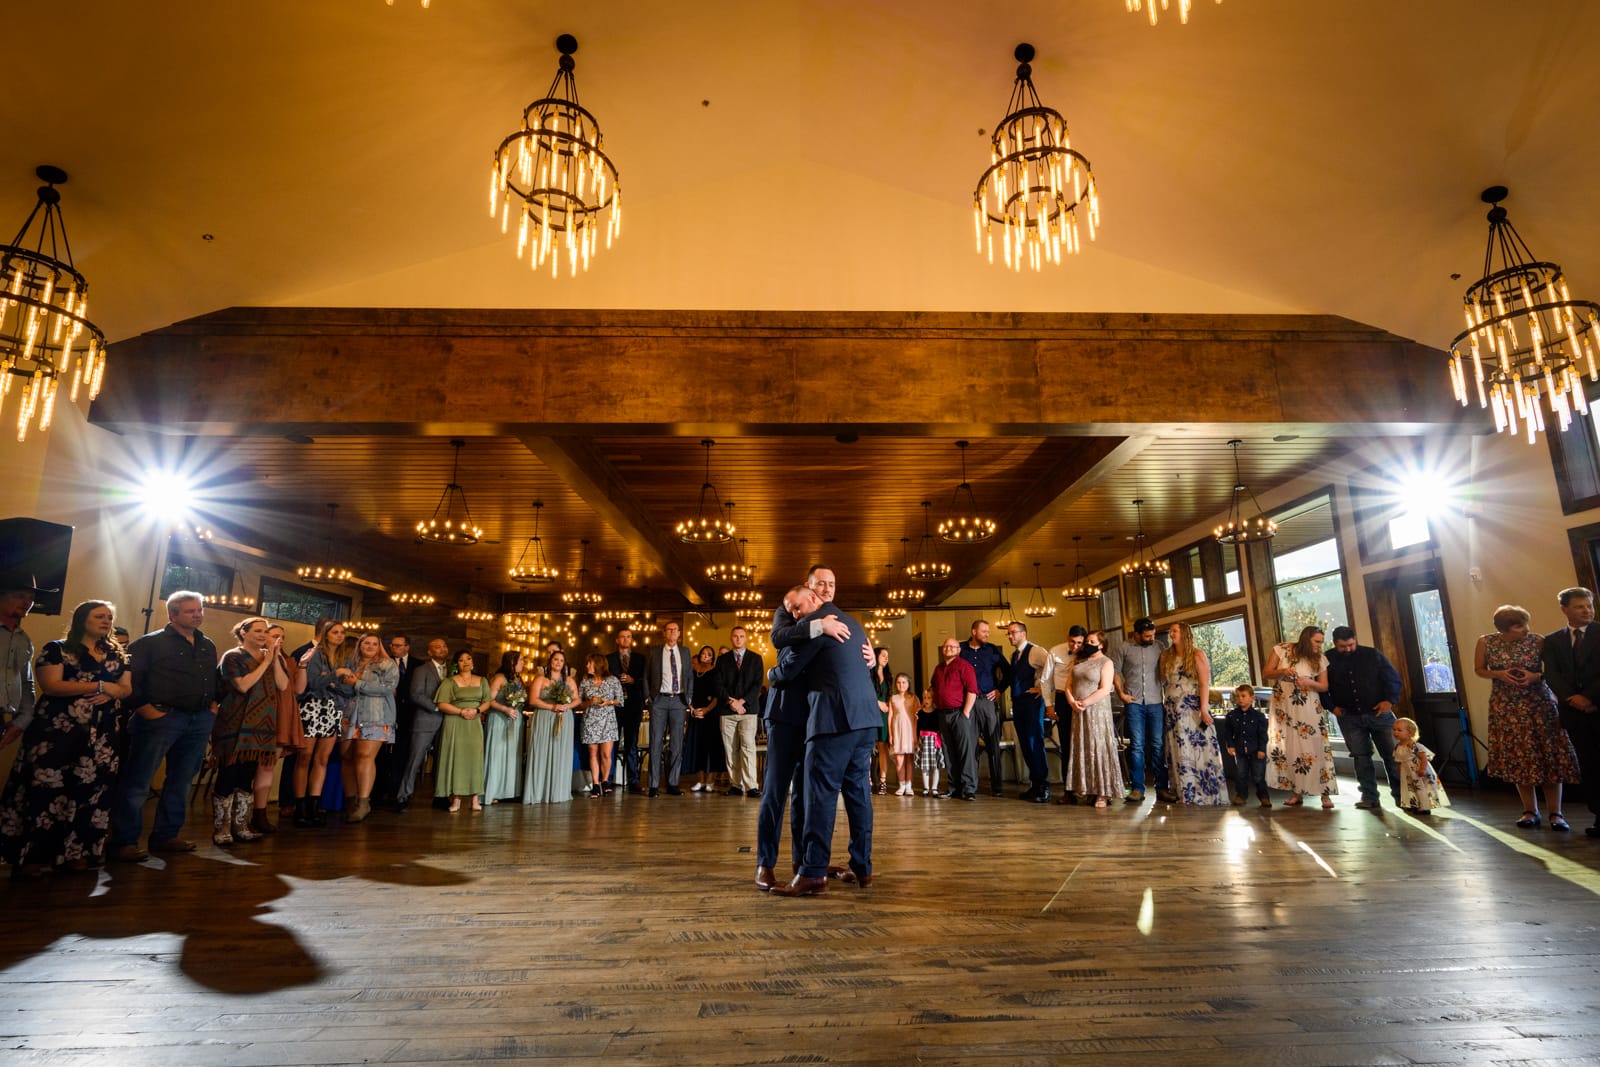 The Grooms' First Dance